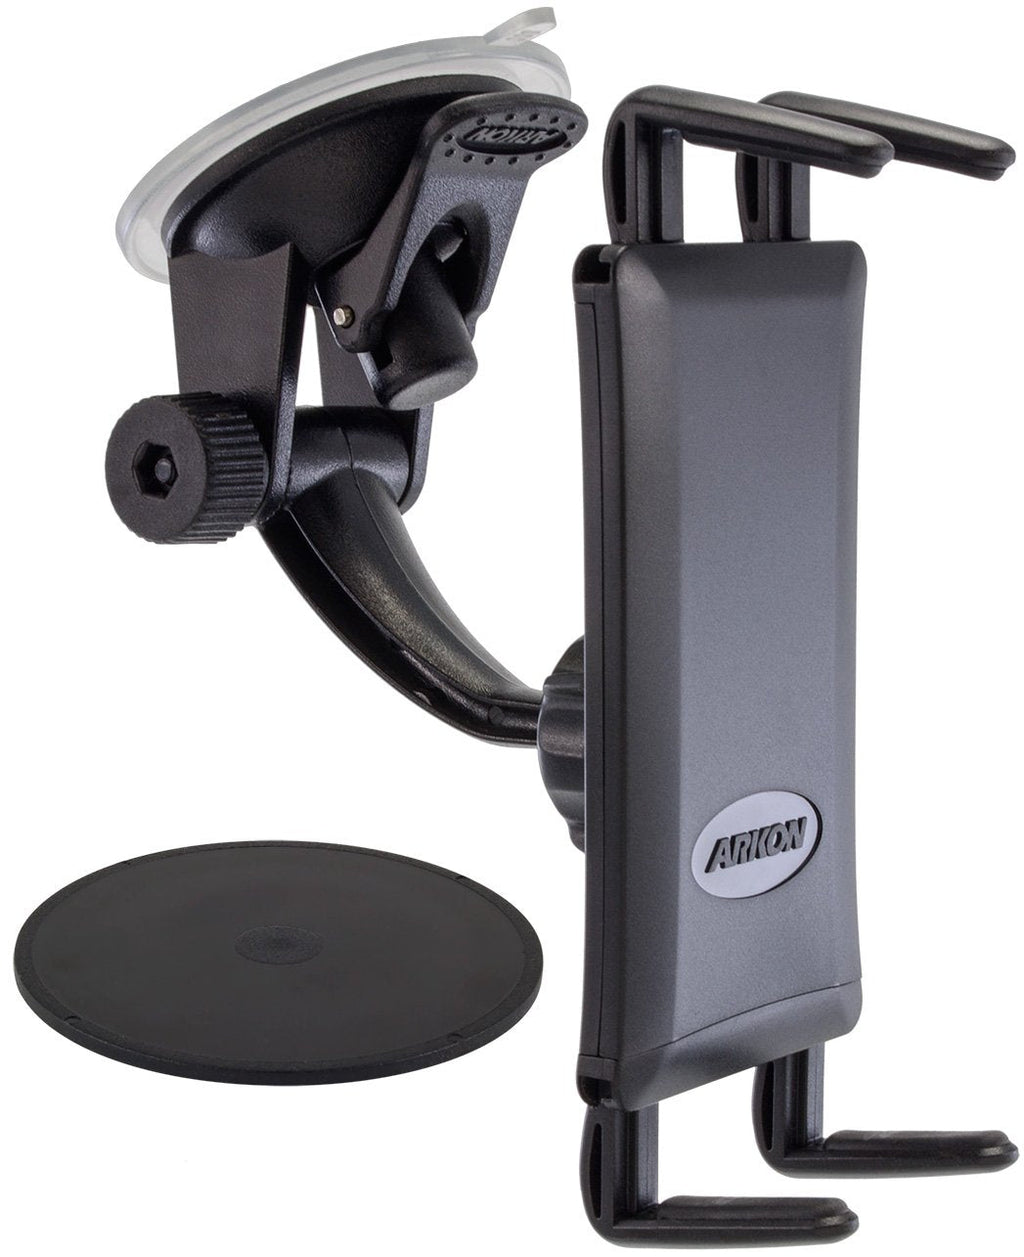  [AUSTRALIA] - Arkon Windshield and Dash Suction Car Mount Holder for Samsung Galaxy S10 S9 S8 Note 9 8 5 Black Retail